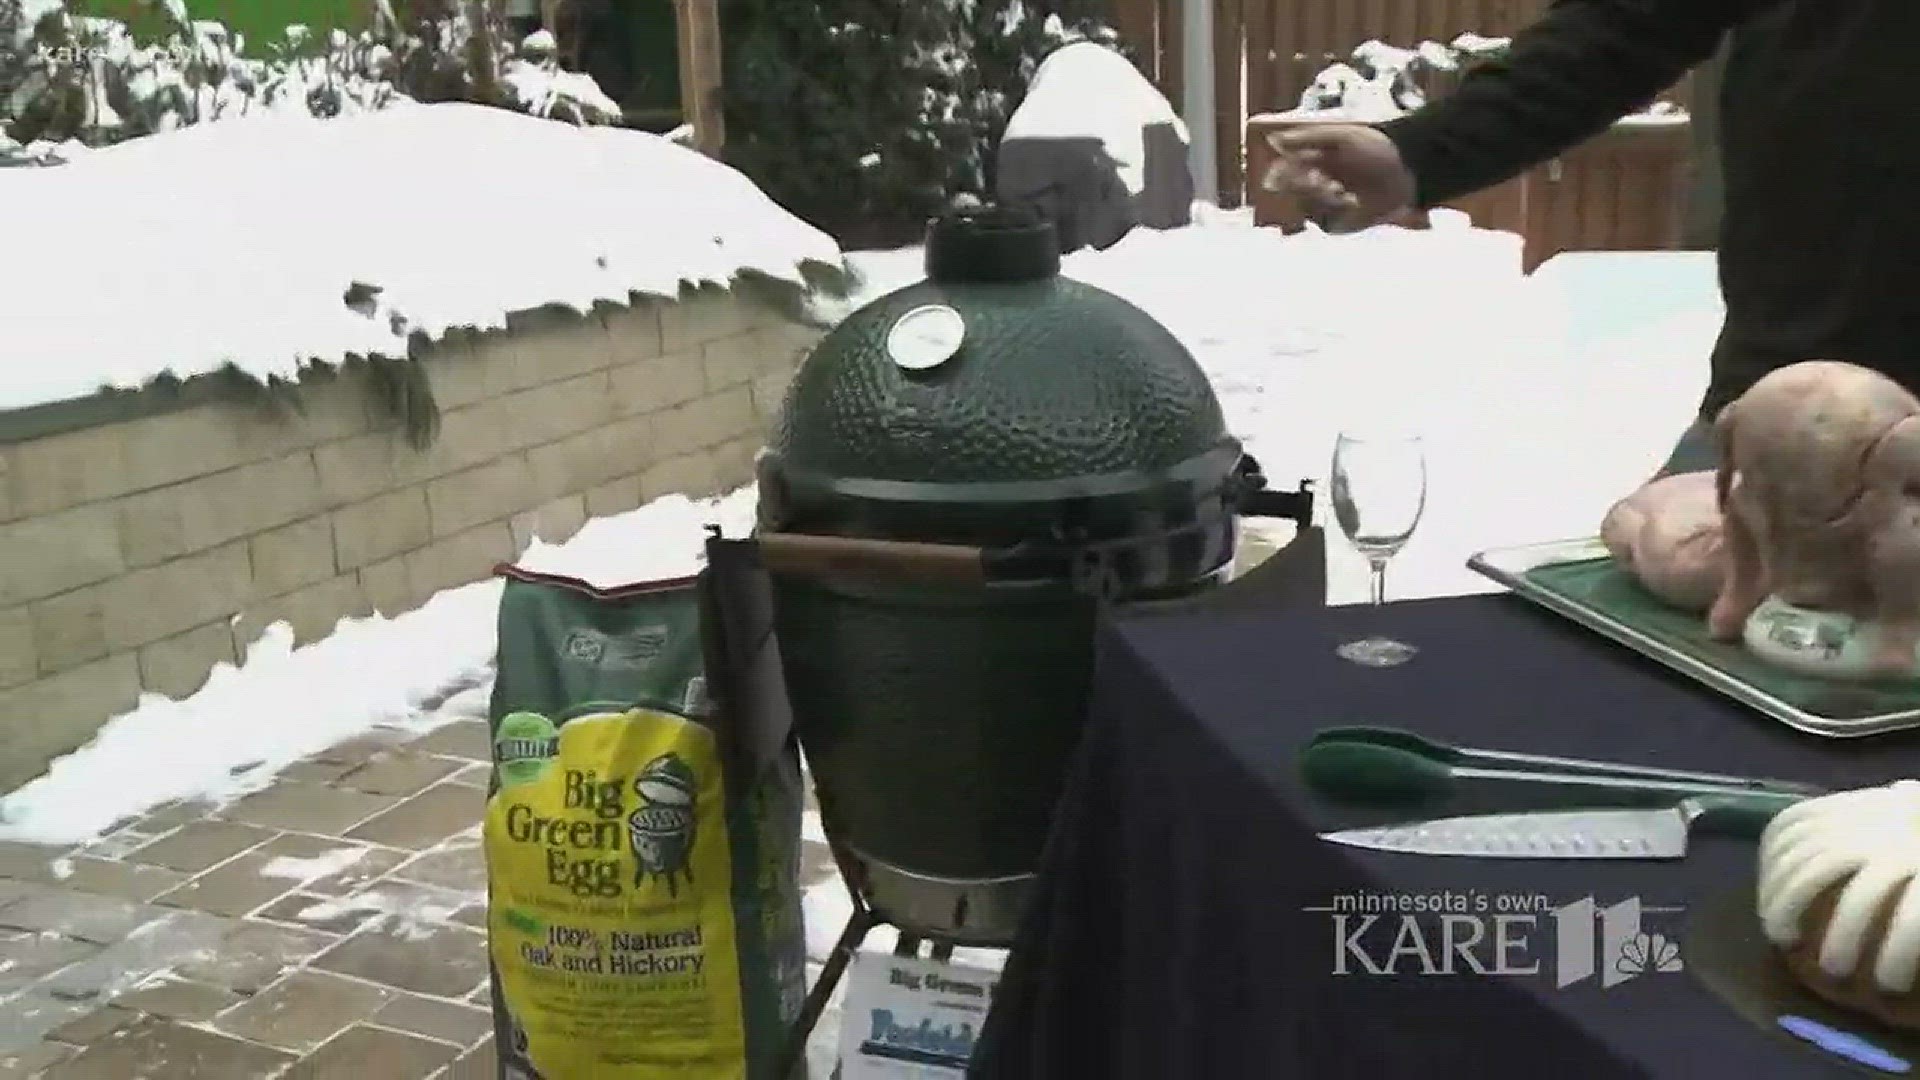 The Big Green Egg is perfect for grilling - and Minnesota Monthly has some tips on how to incorporate wine, ahead of their annual Food & Wine Experience. http://kare11.tv/2FtDQRc